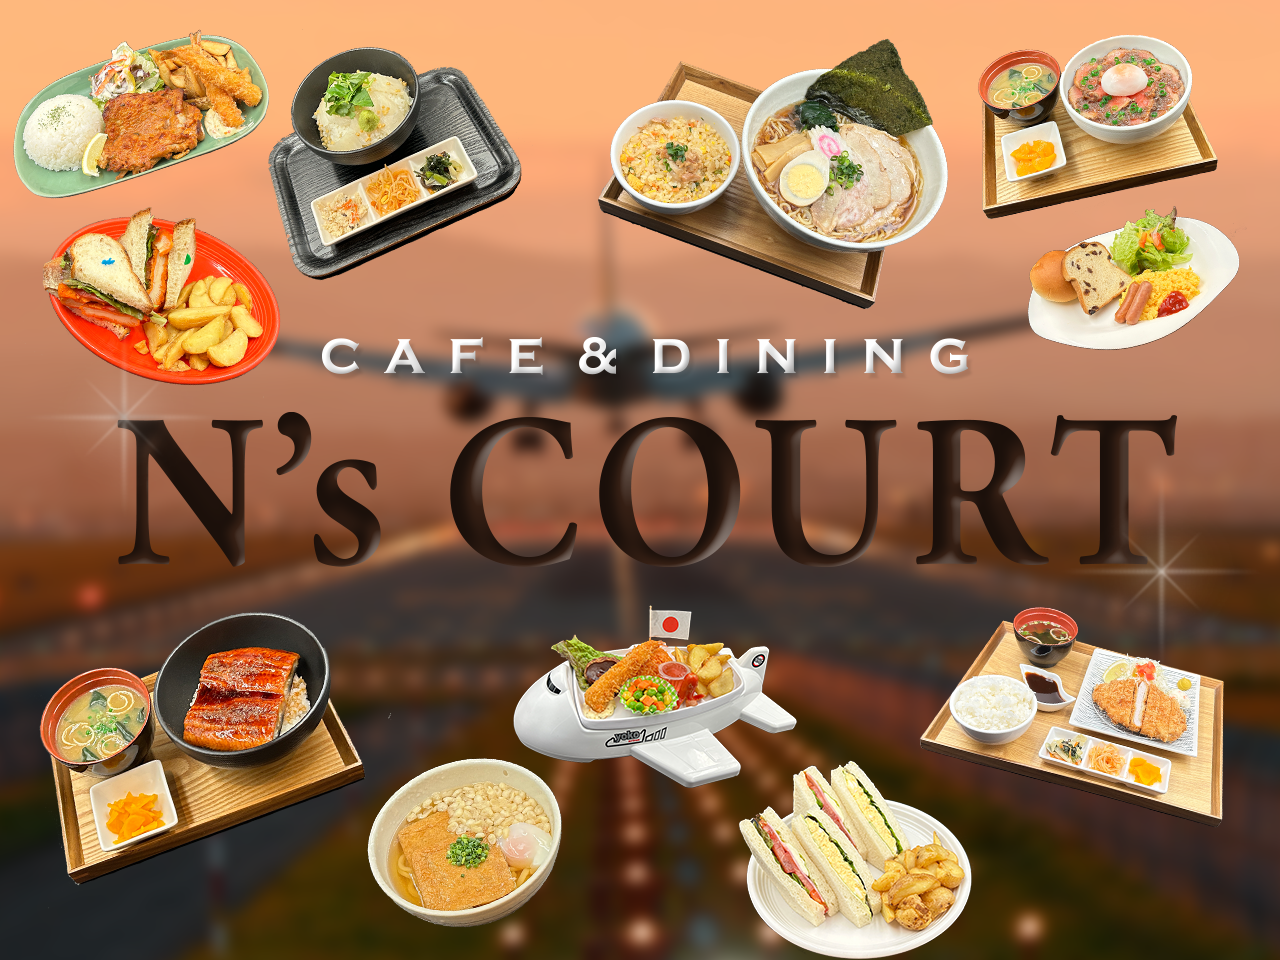 CAFE ＆ DINING N's COURT的推薦商品照片